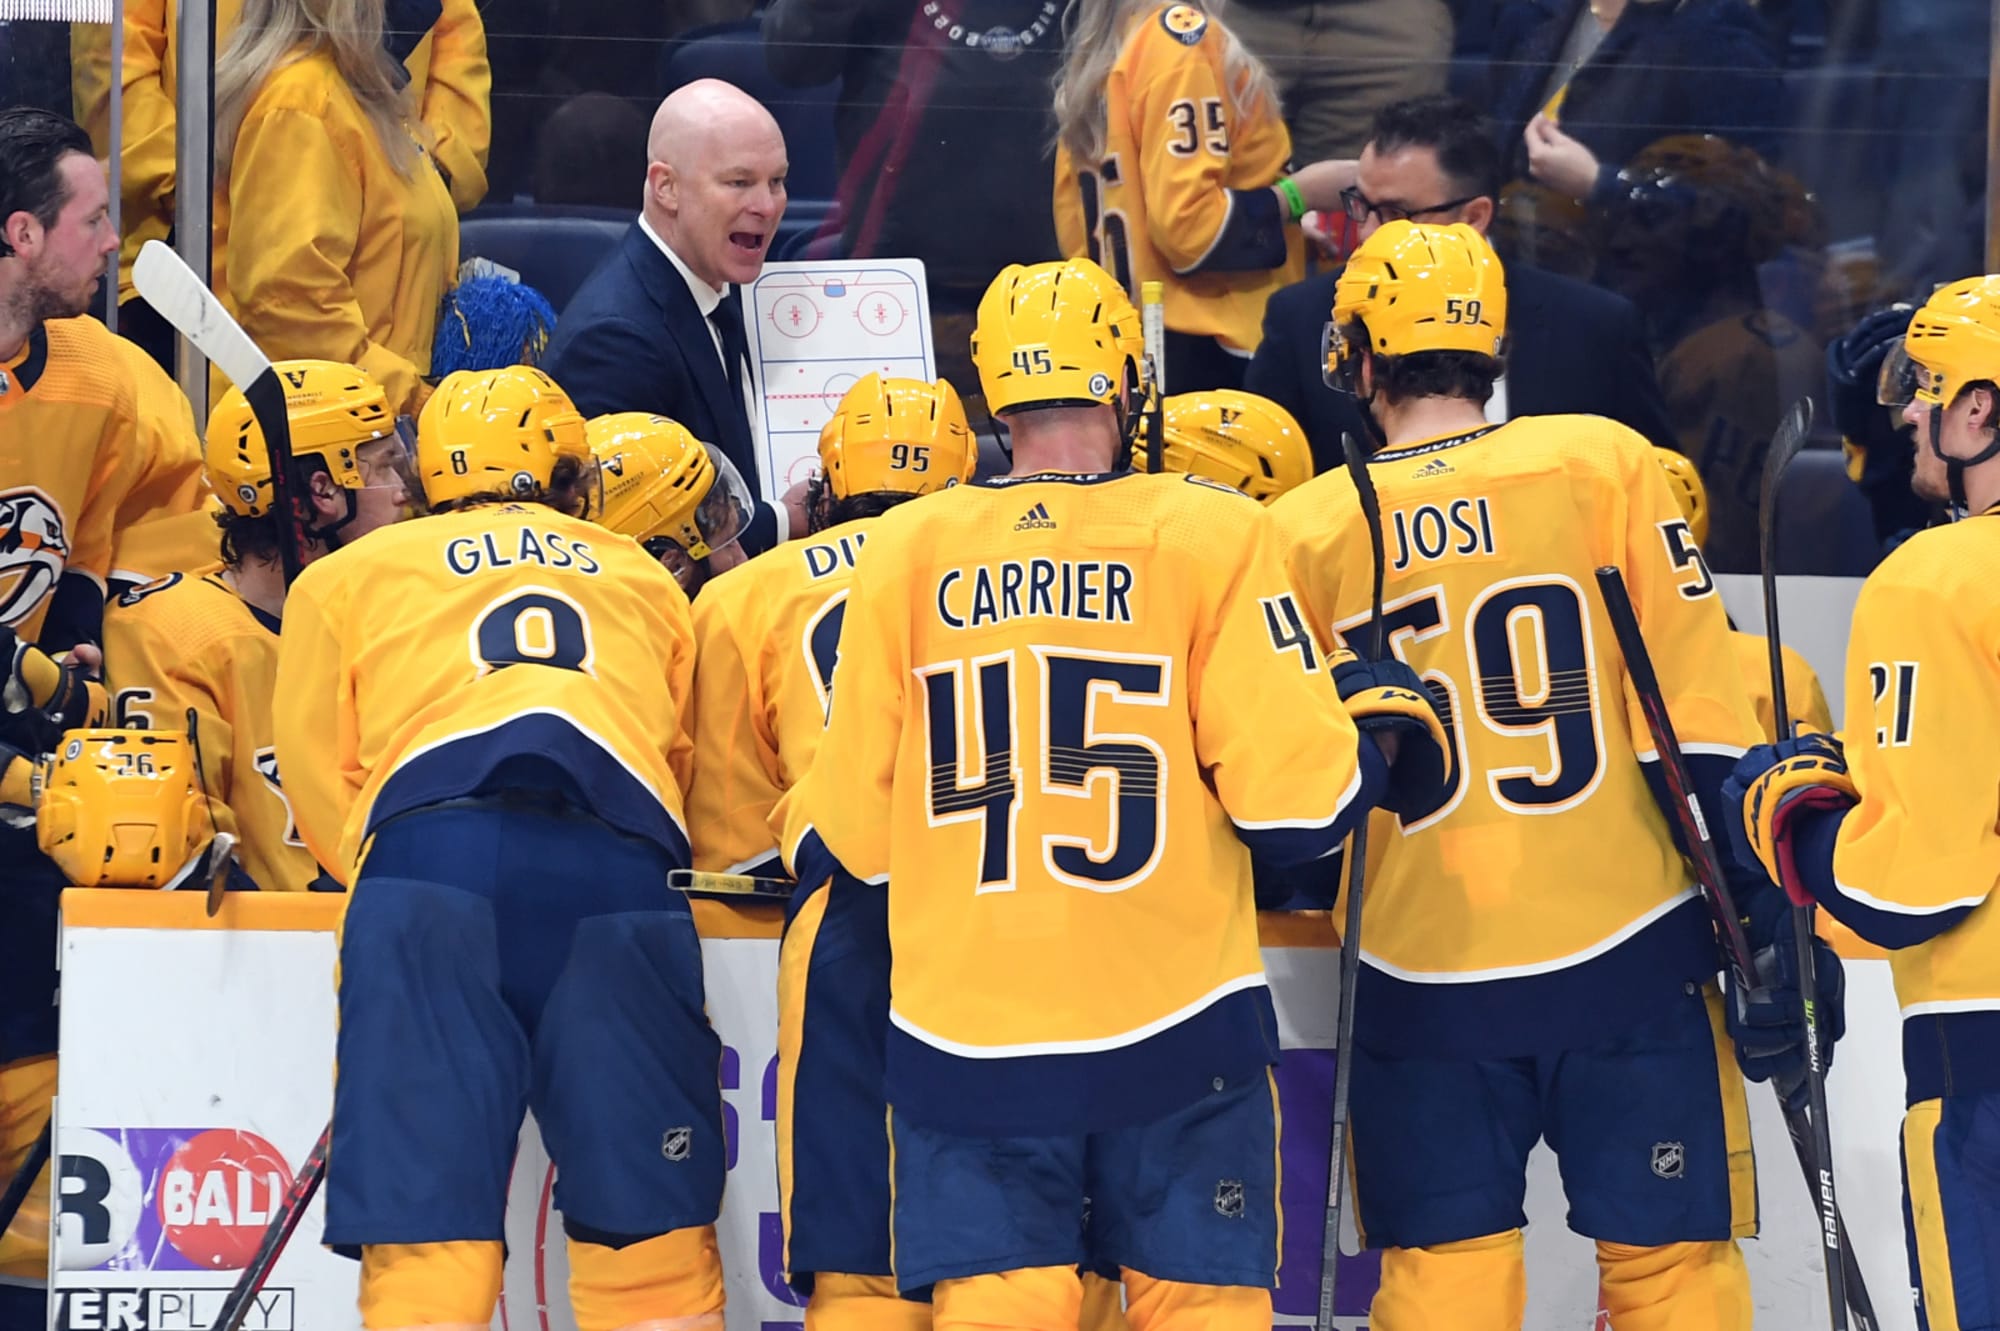 Nashville Predators - LAST CHANCE. Today is the final day to save